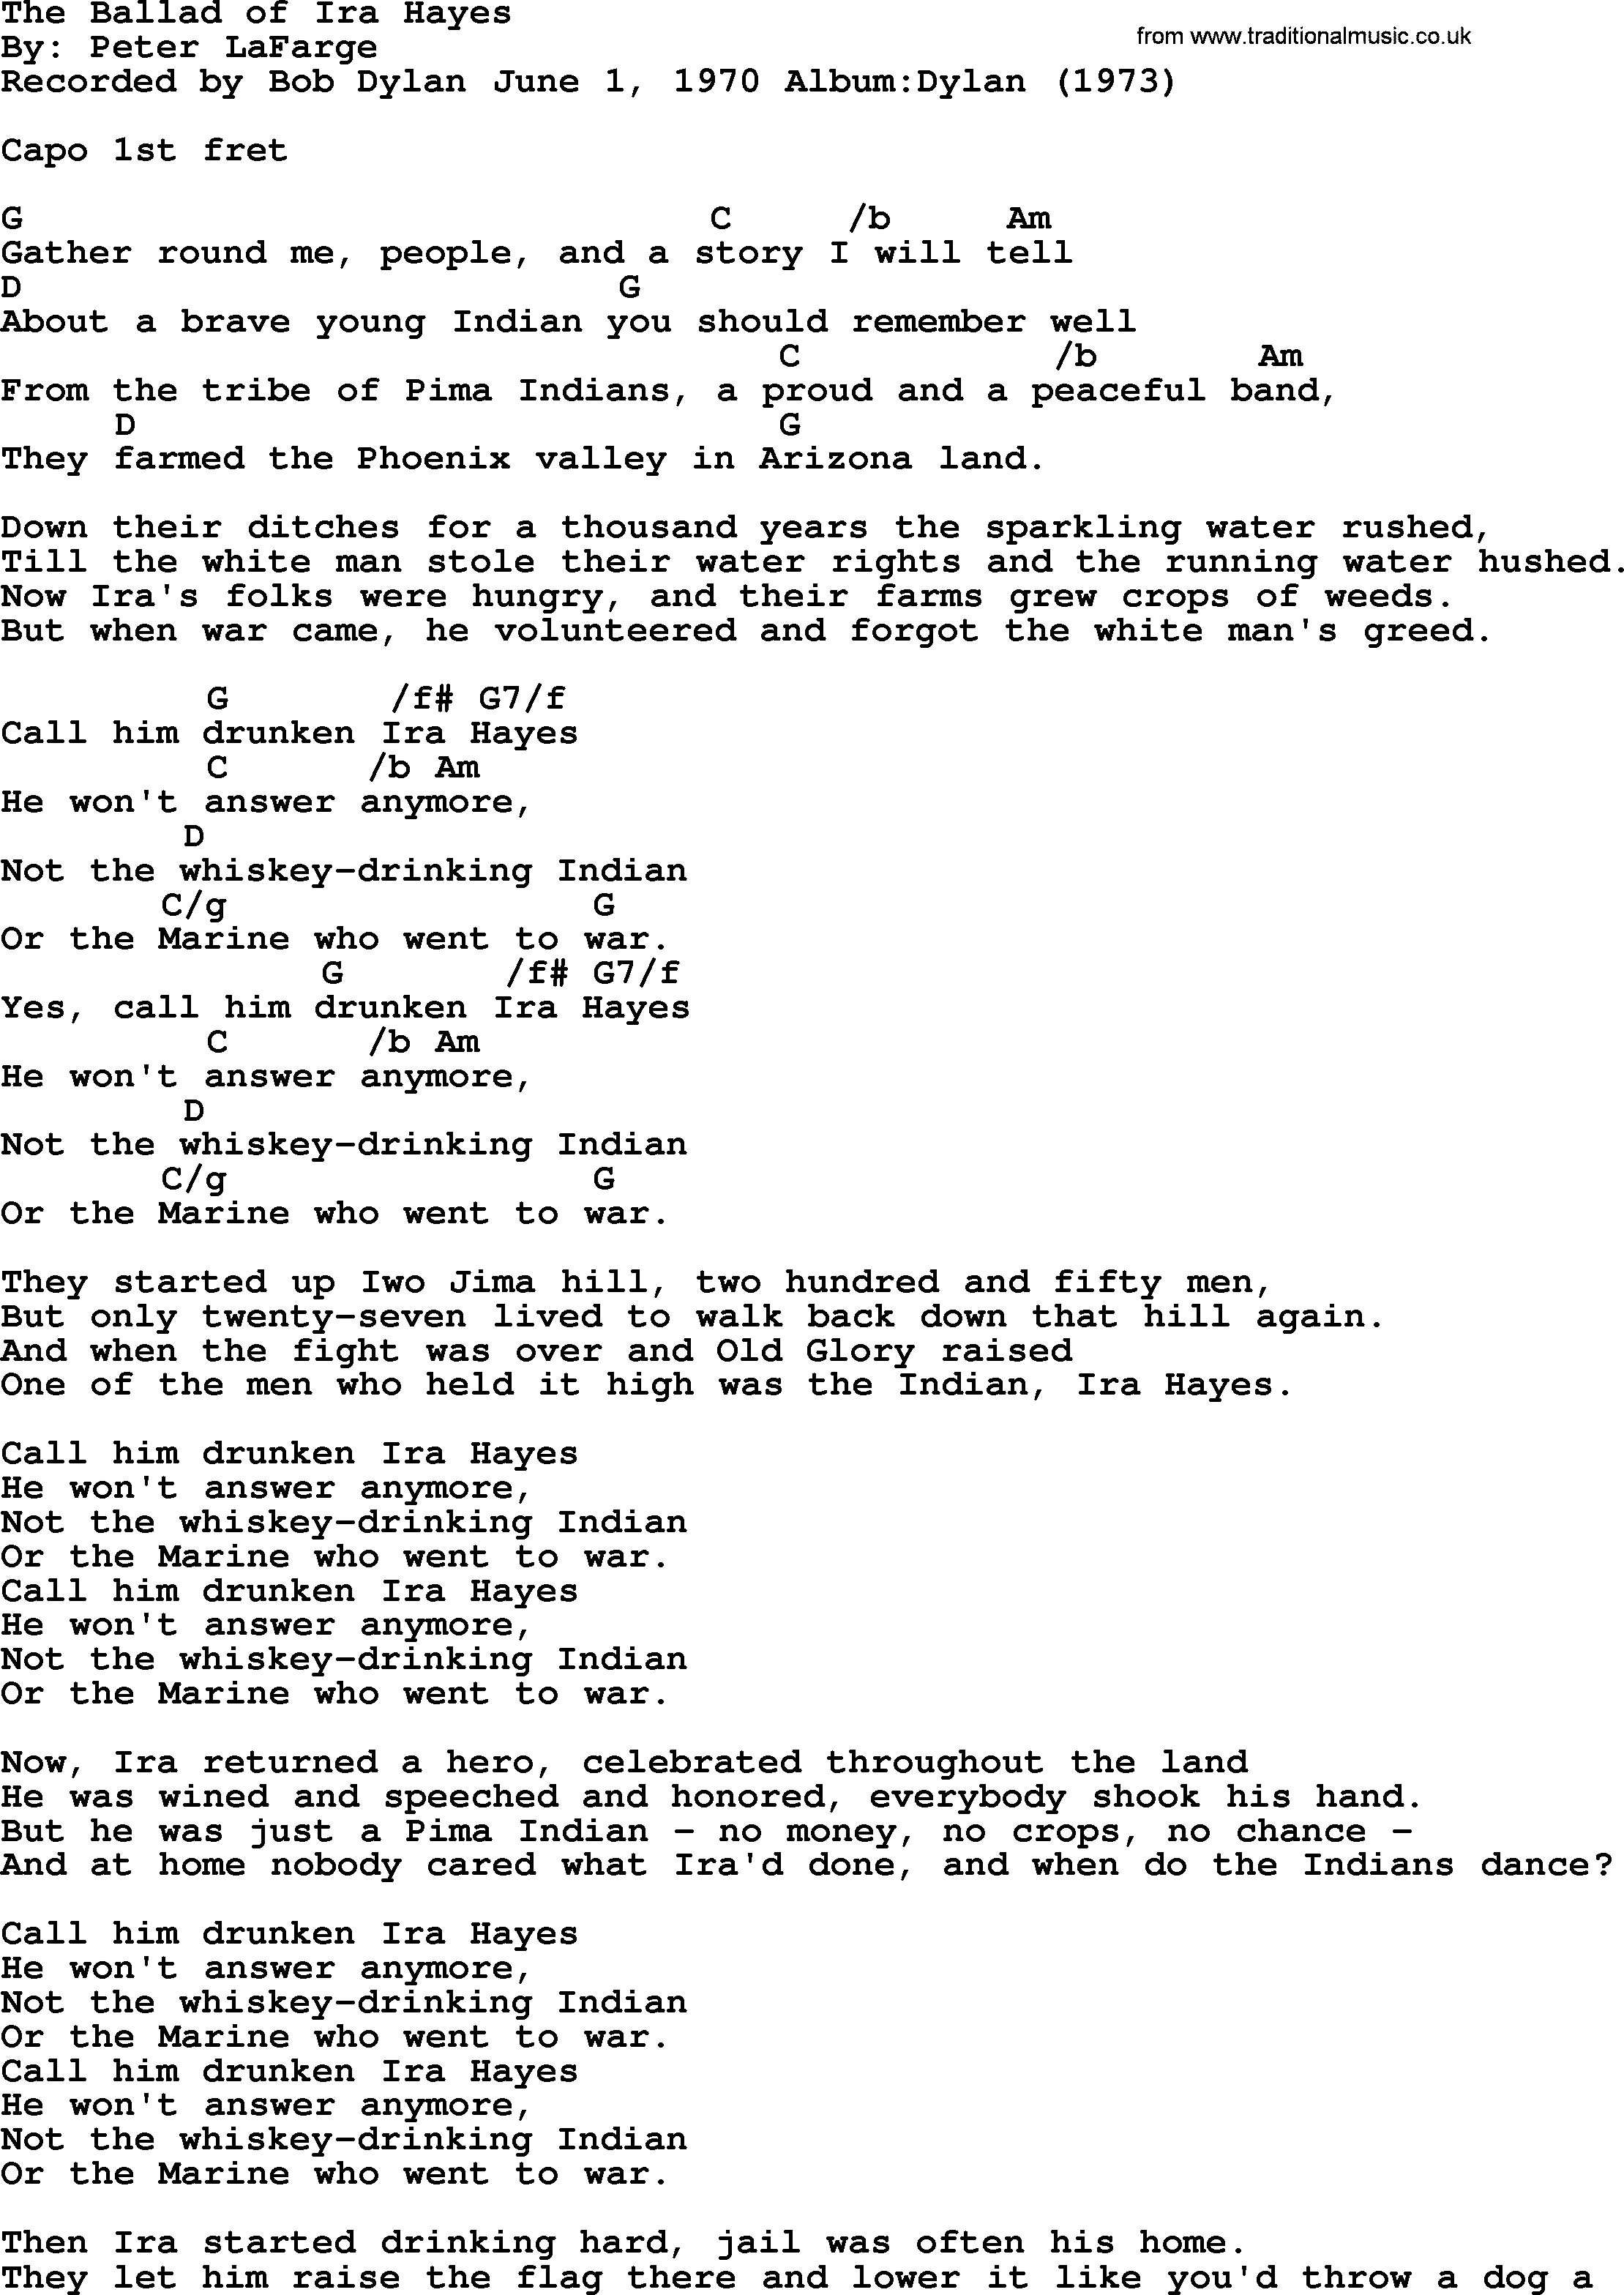 Bob Dylan song, lyrics with chords - The Ballad of Ira Hayes